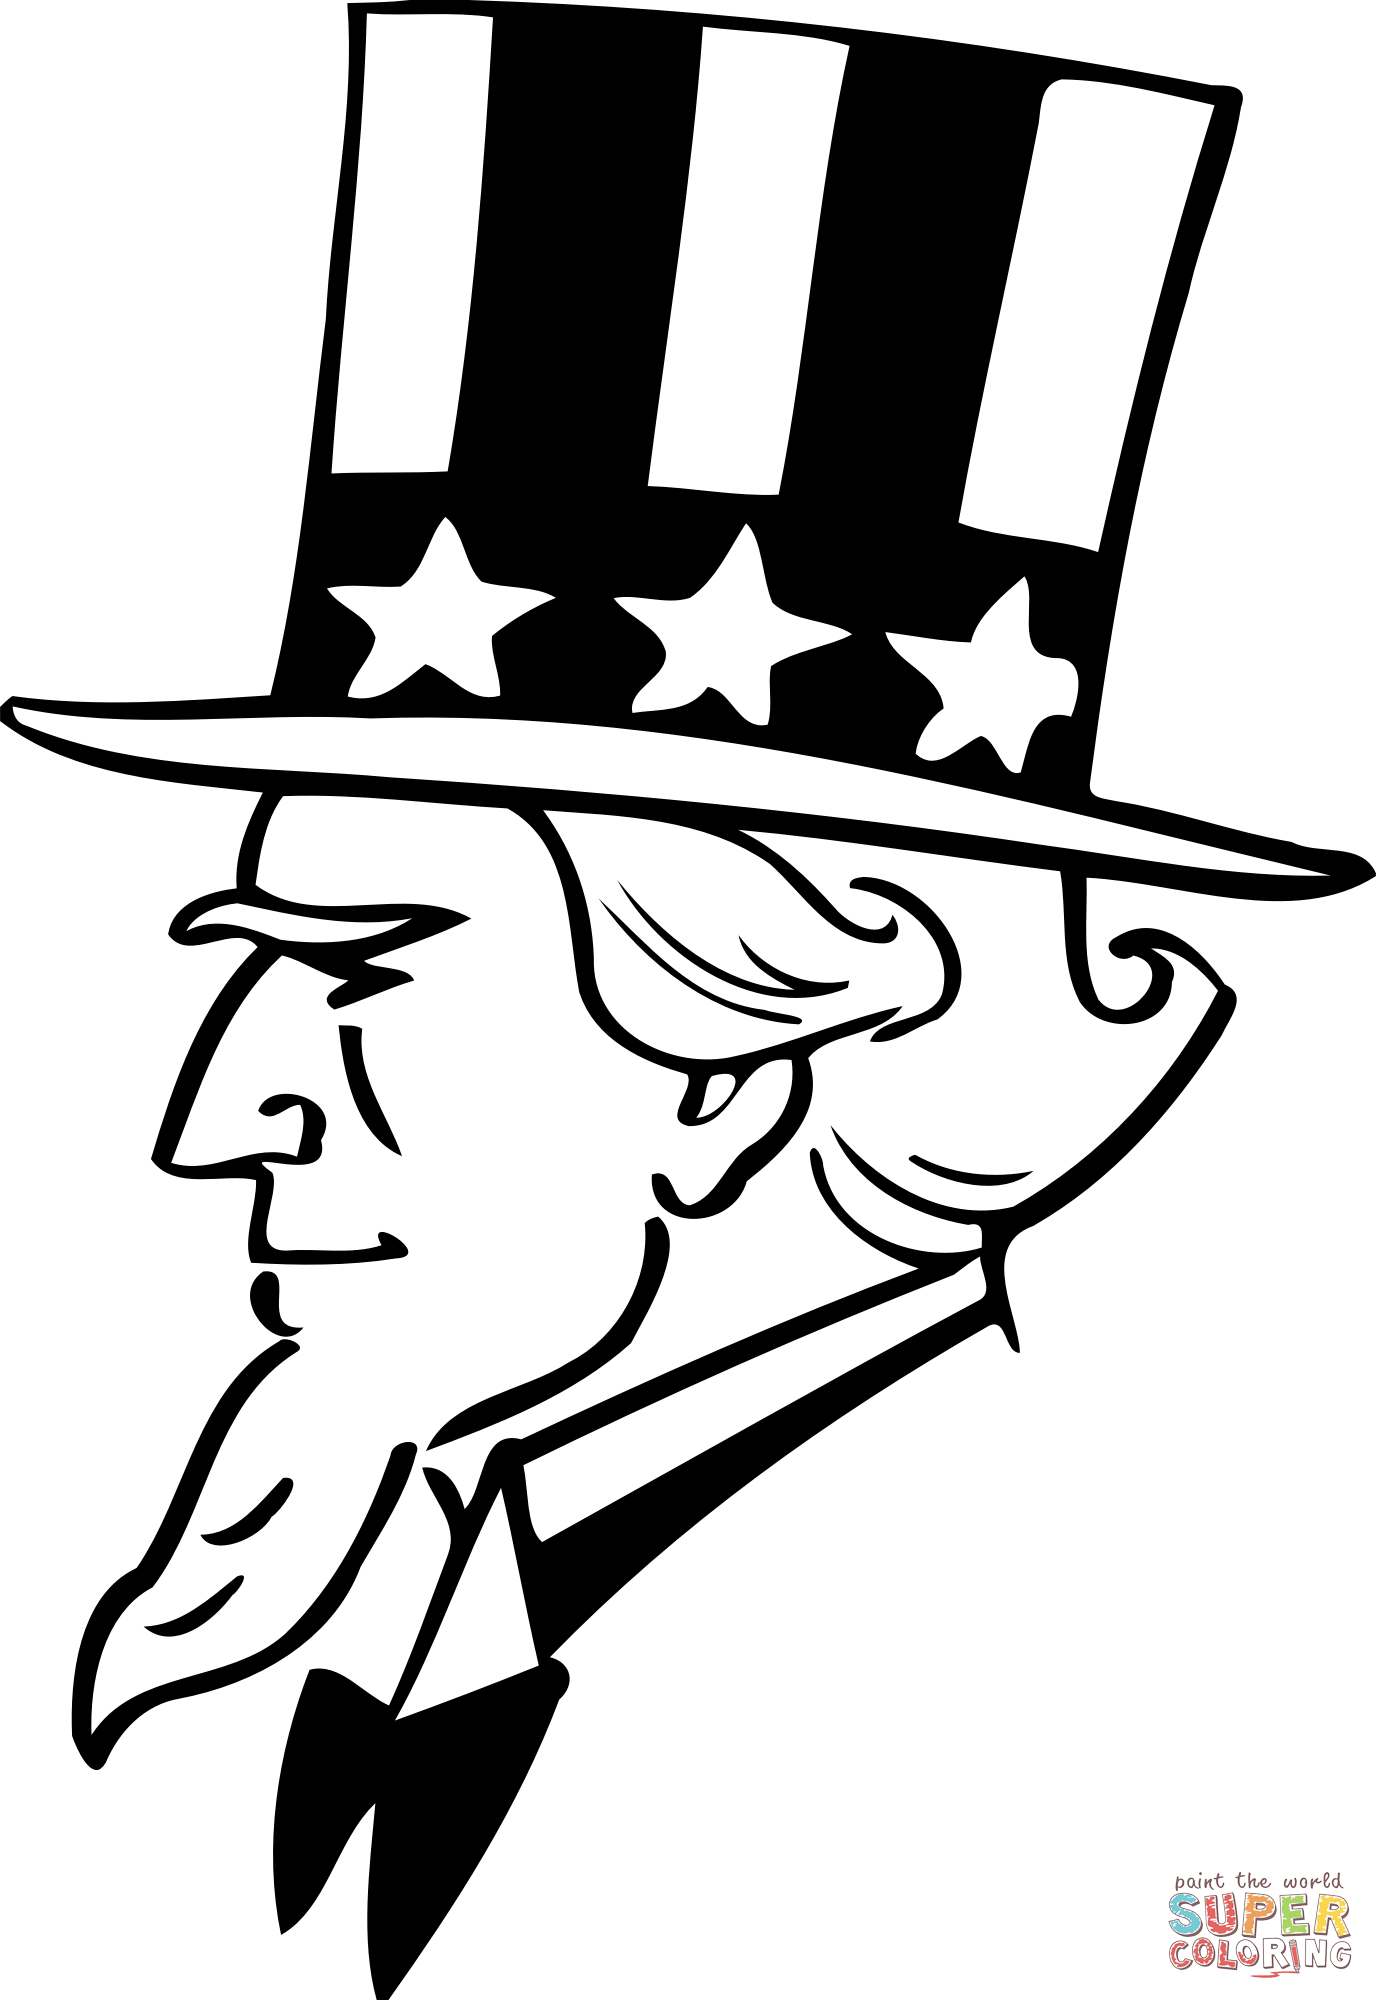 Vintage uncle sam coloring page free printable coloring pages